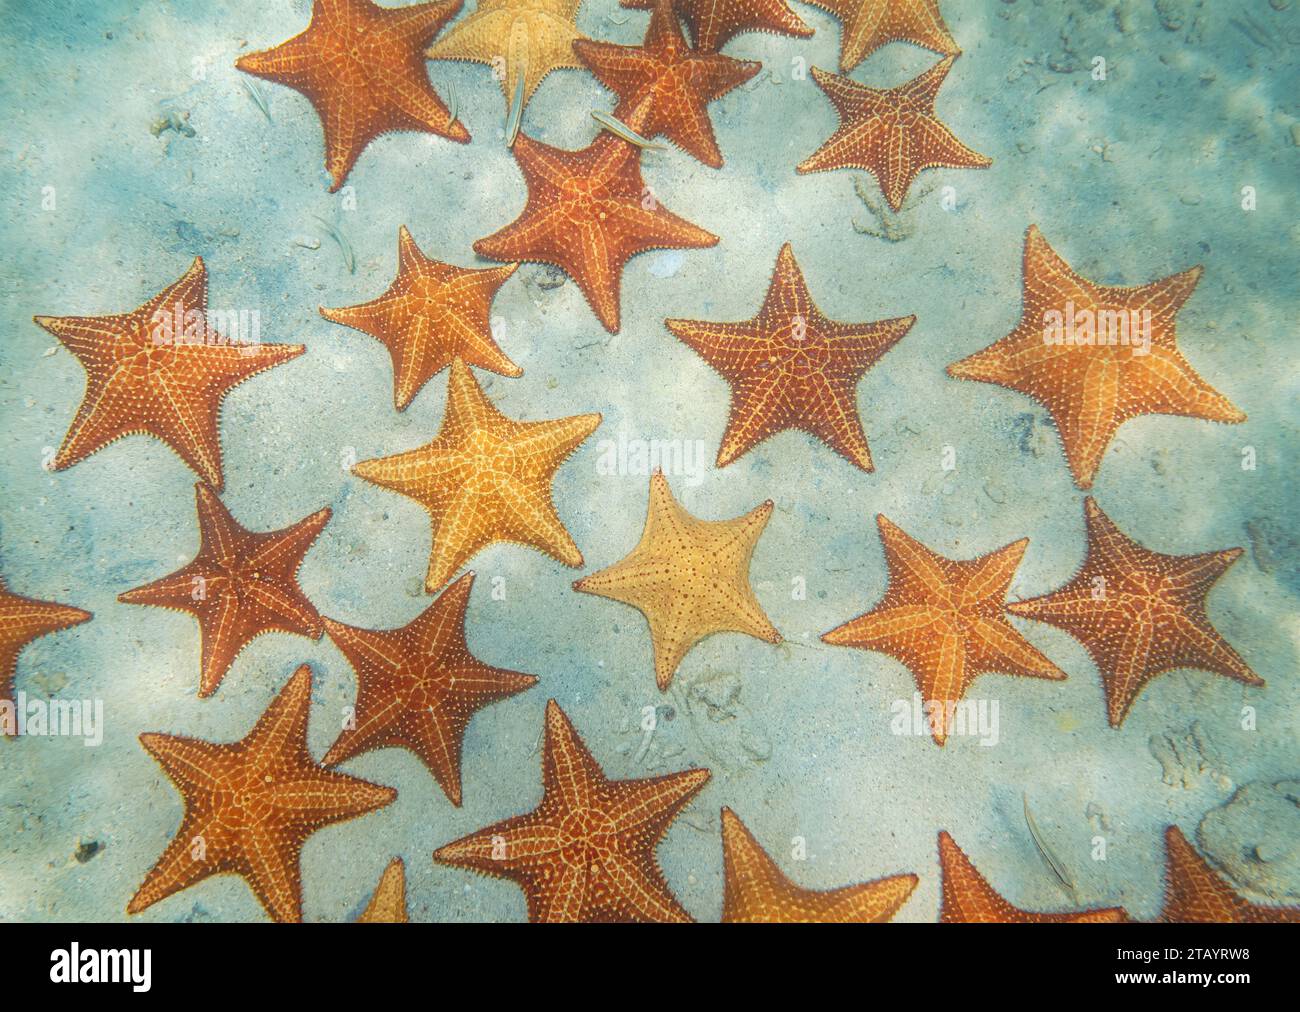 Sea stars Oreaster reticulatus underwater on a sandy seabed seen from above, Caribbean sea, natural scene Stock Photo